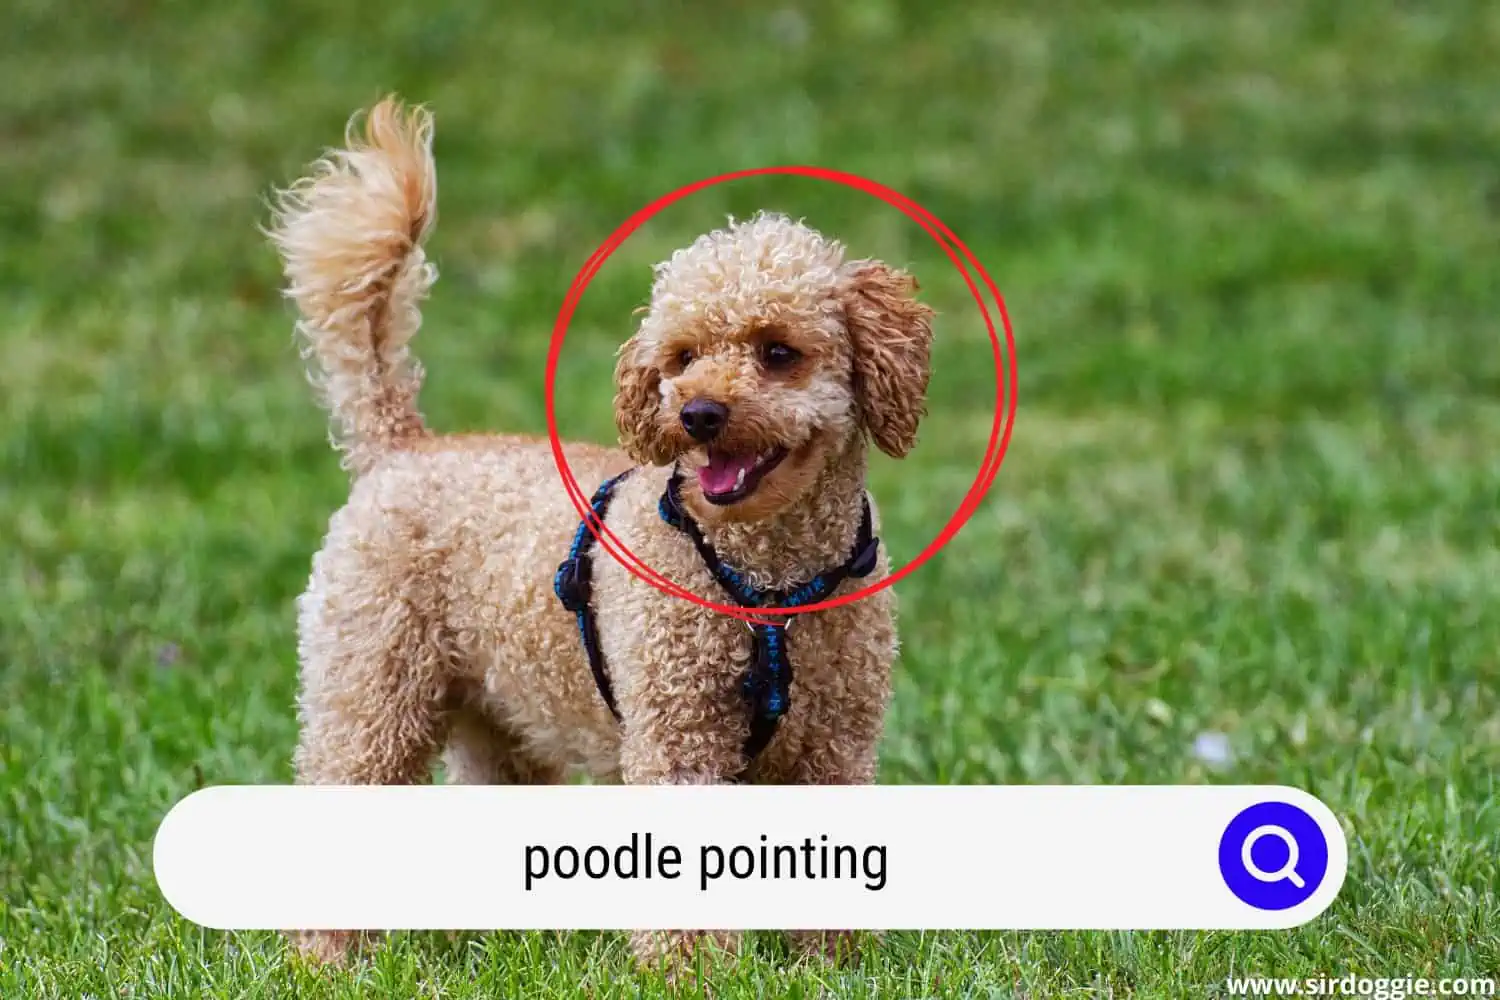 poodle pointing